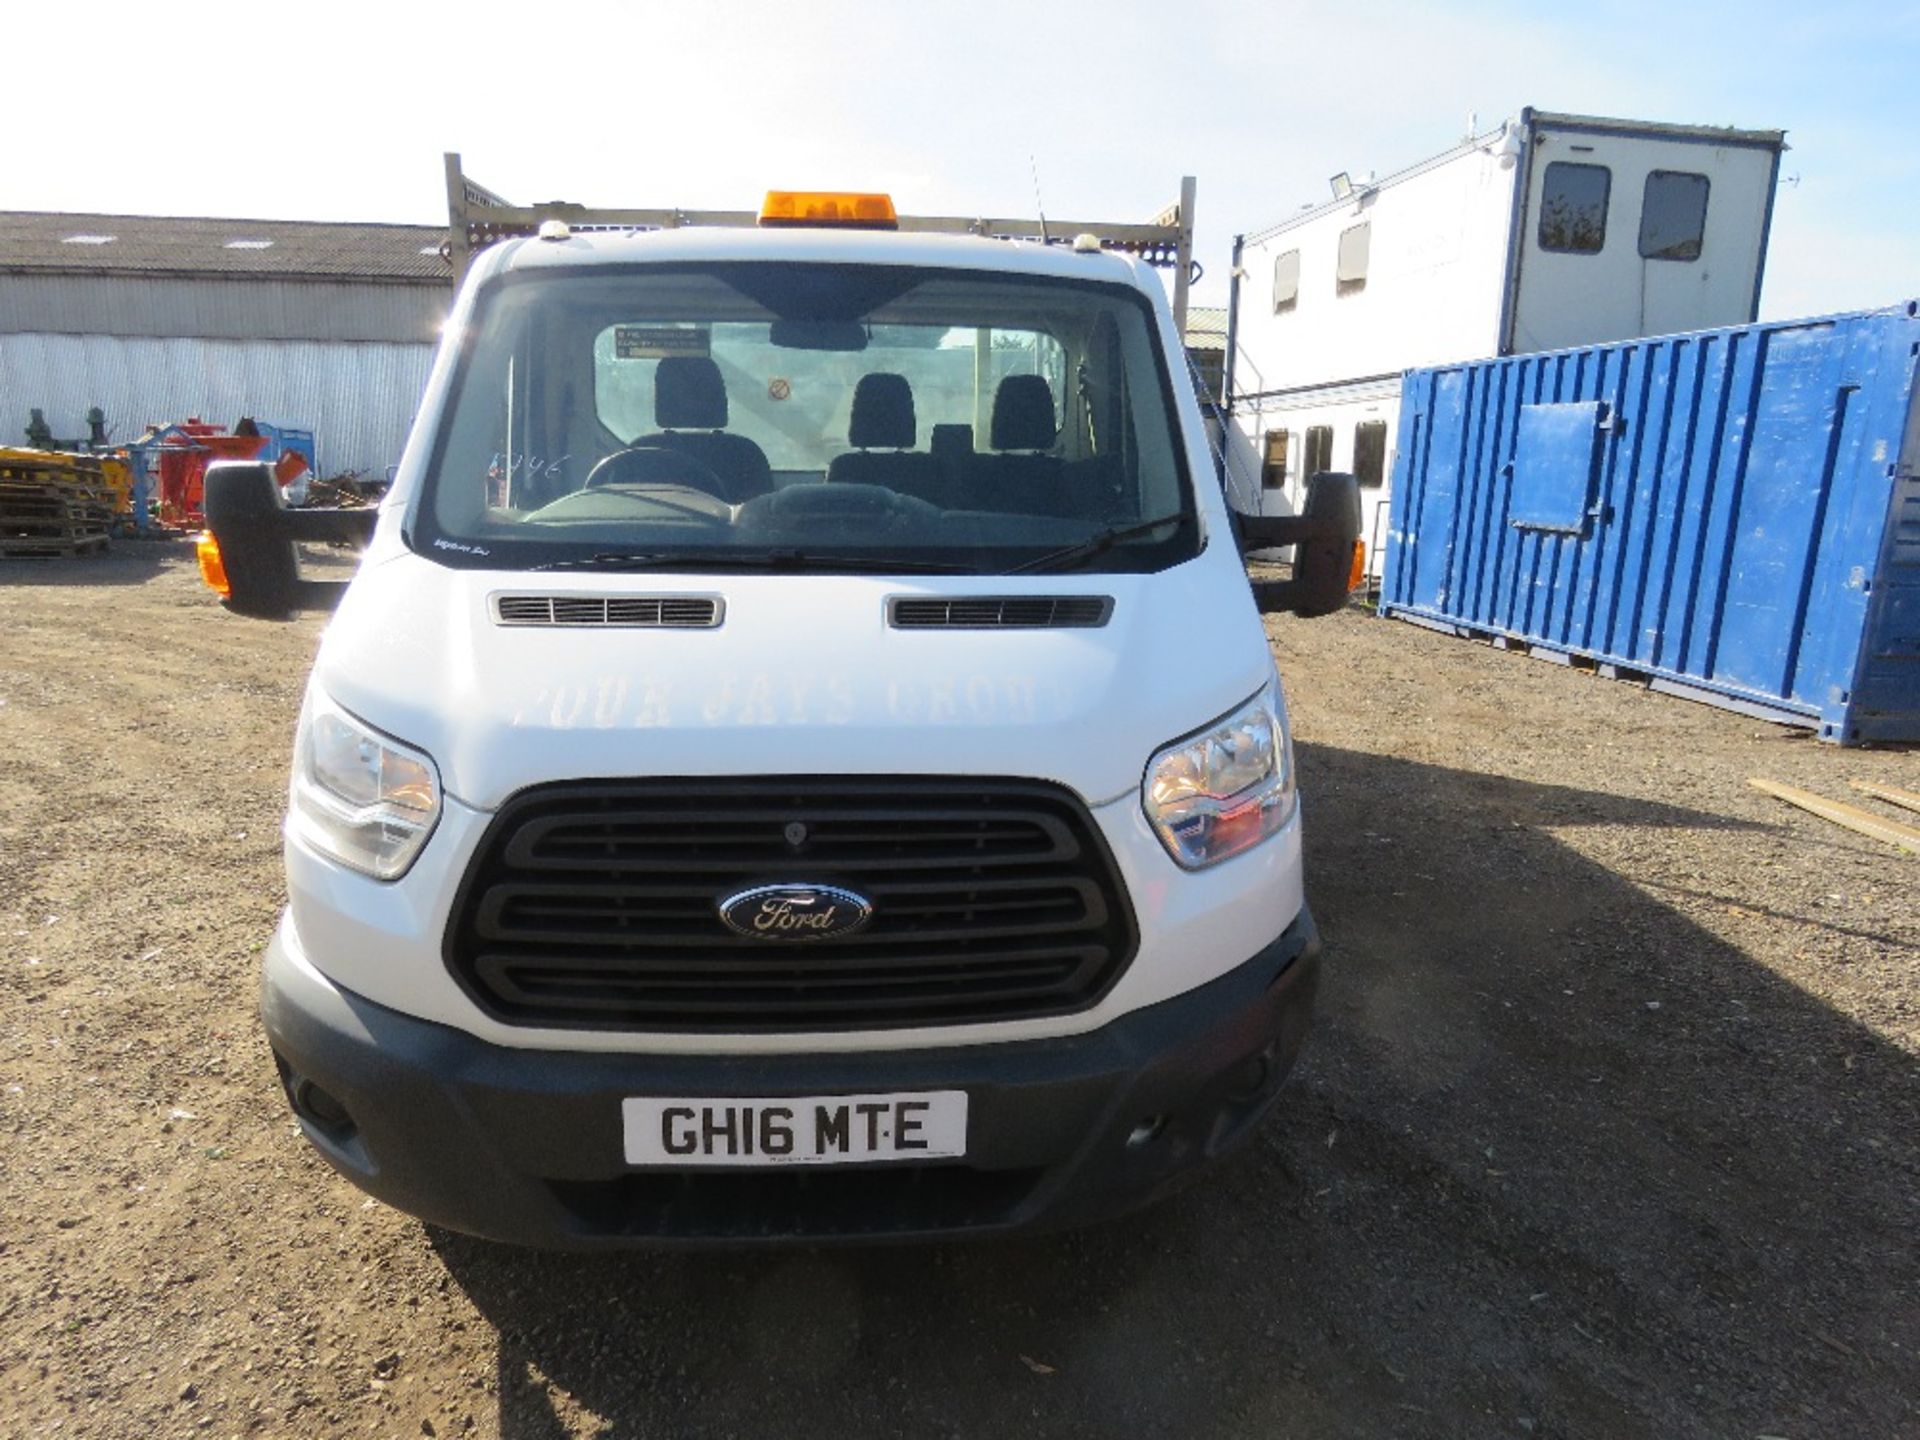 FORD TRANSIT 350 FLAT BED PICKUP TRUCK WITH REAR TAIL LIFT REG:GH16 MTE. WITH V5, OWNED BY VENDOR FR - Image 3 of 13